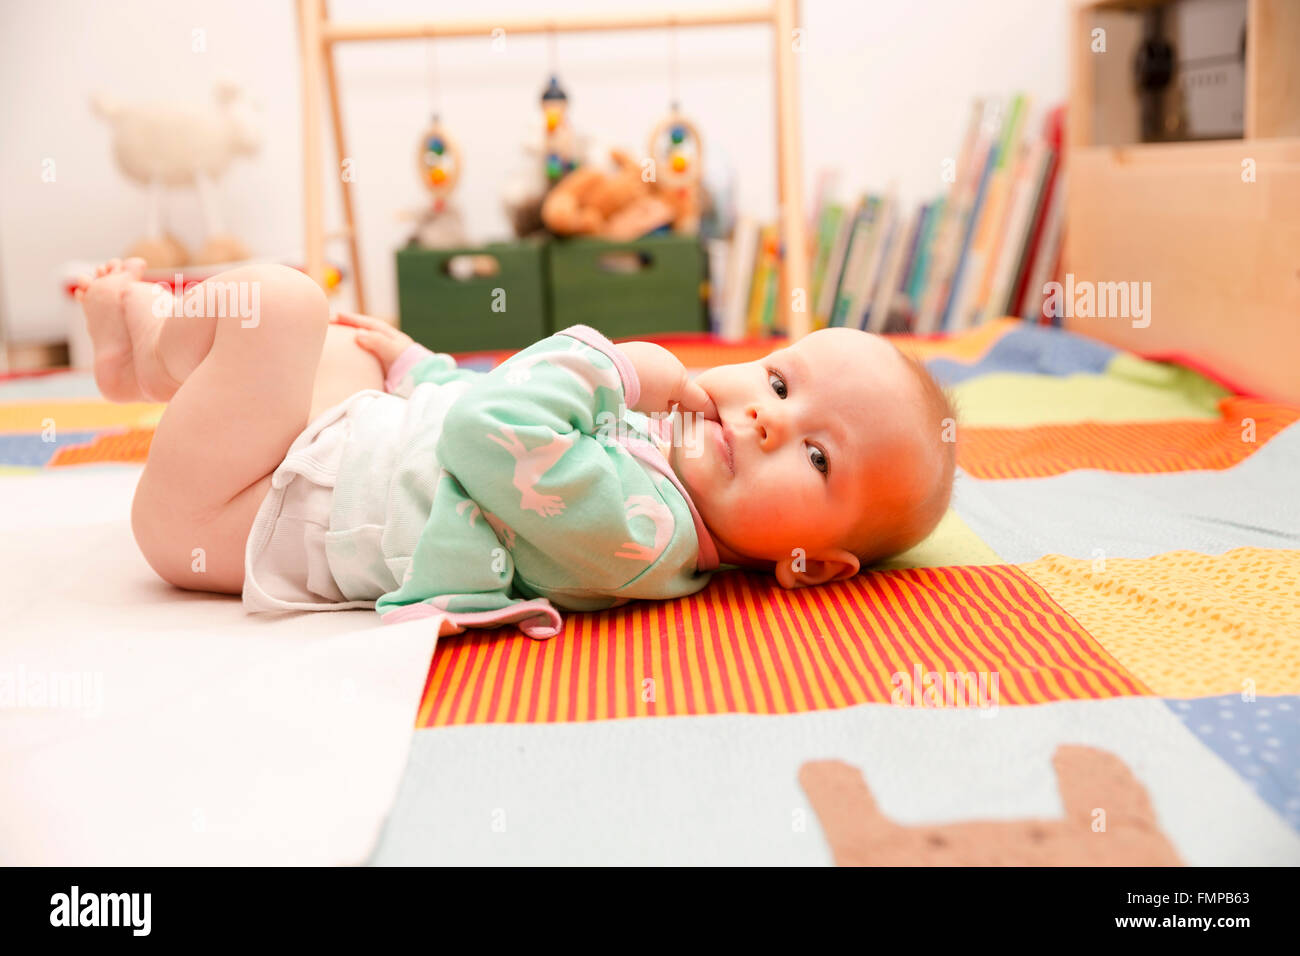 Baby, 6 months old, lying on a colourful blanket Stock Photo